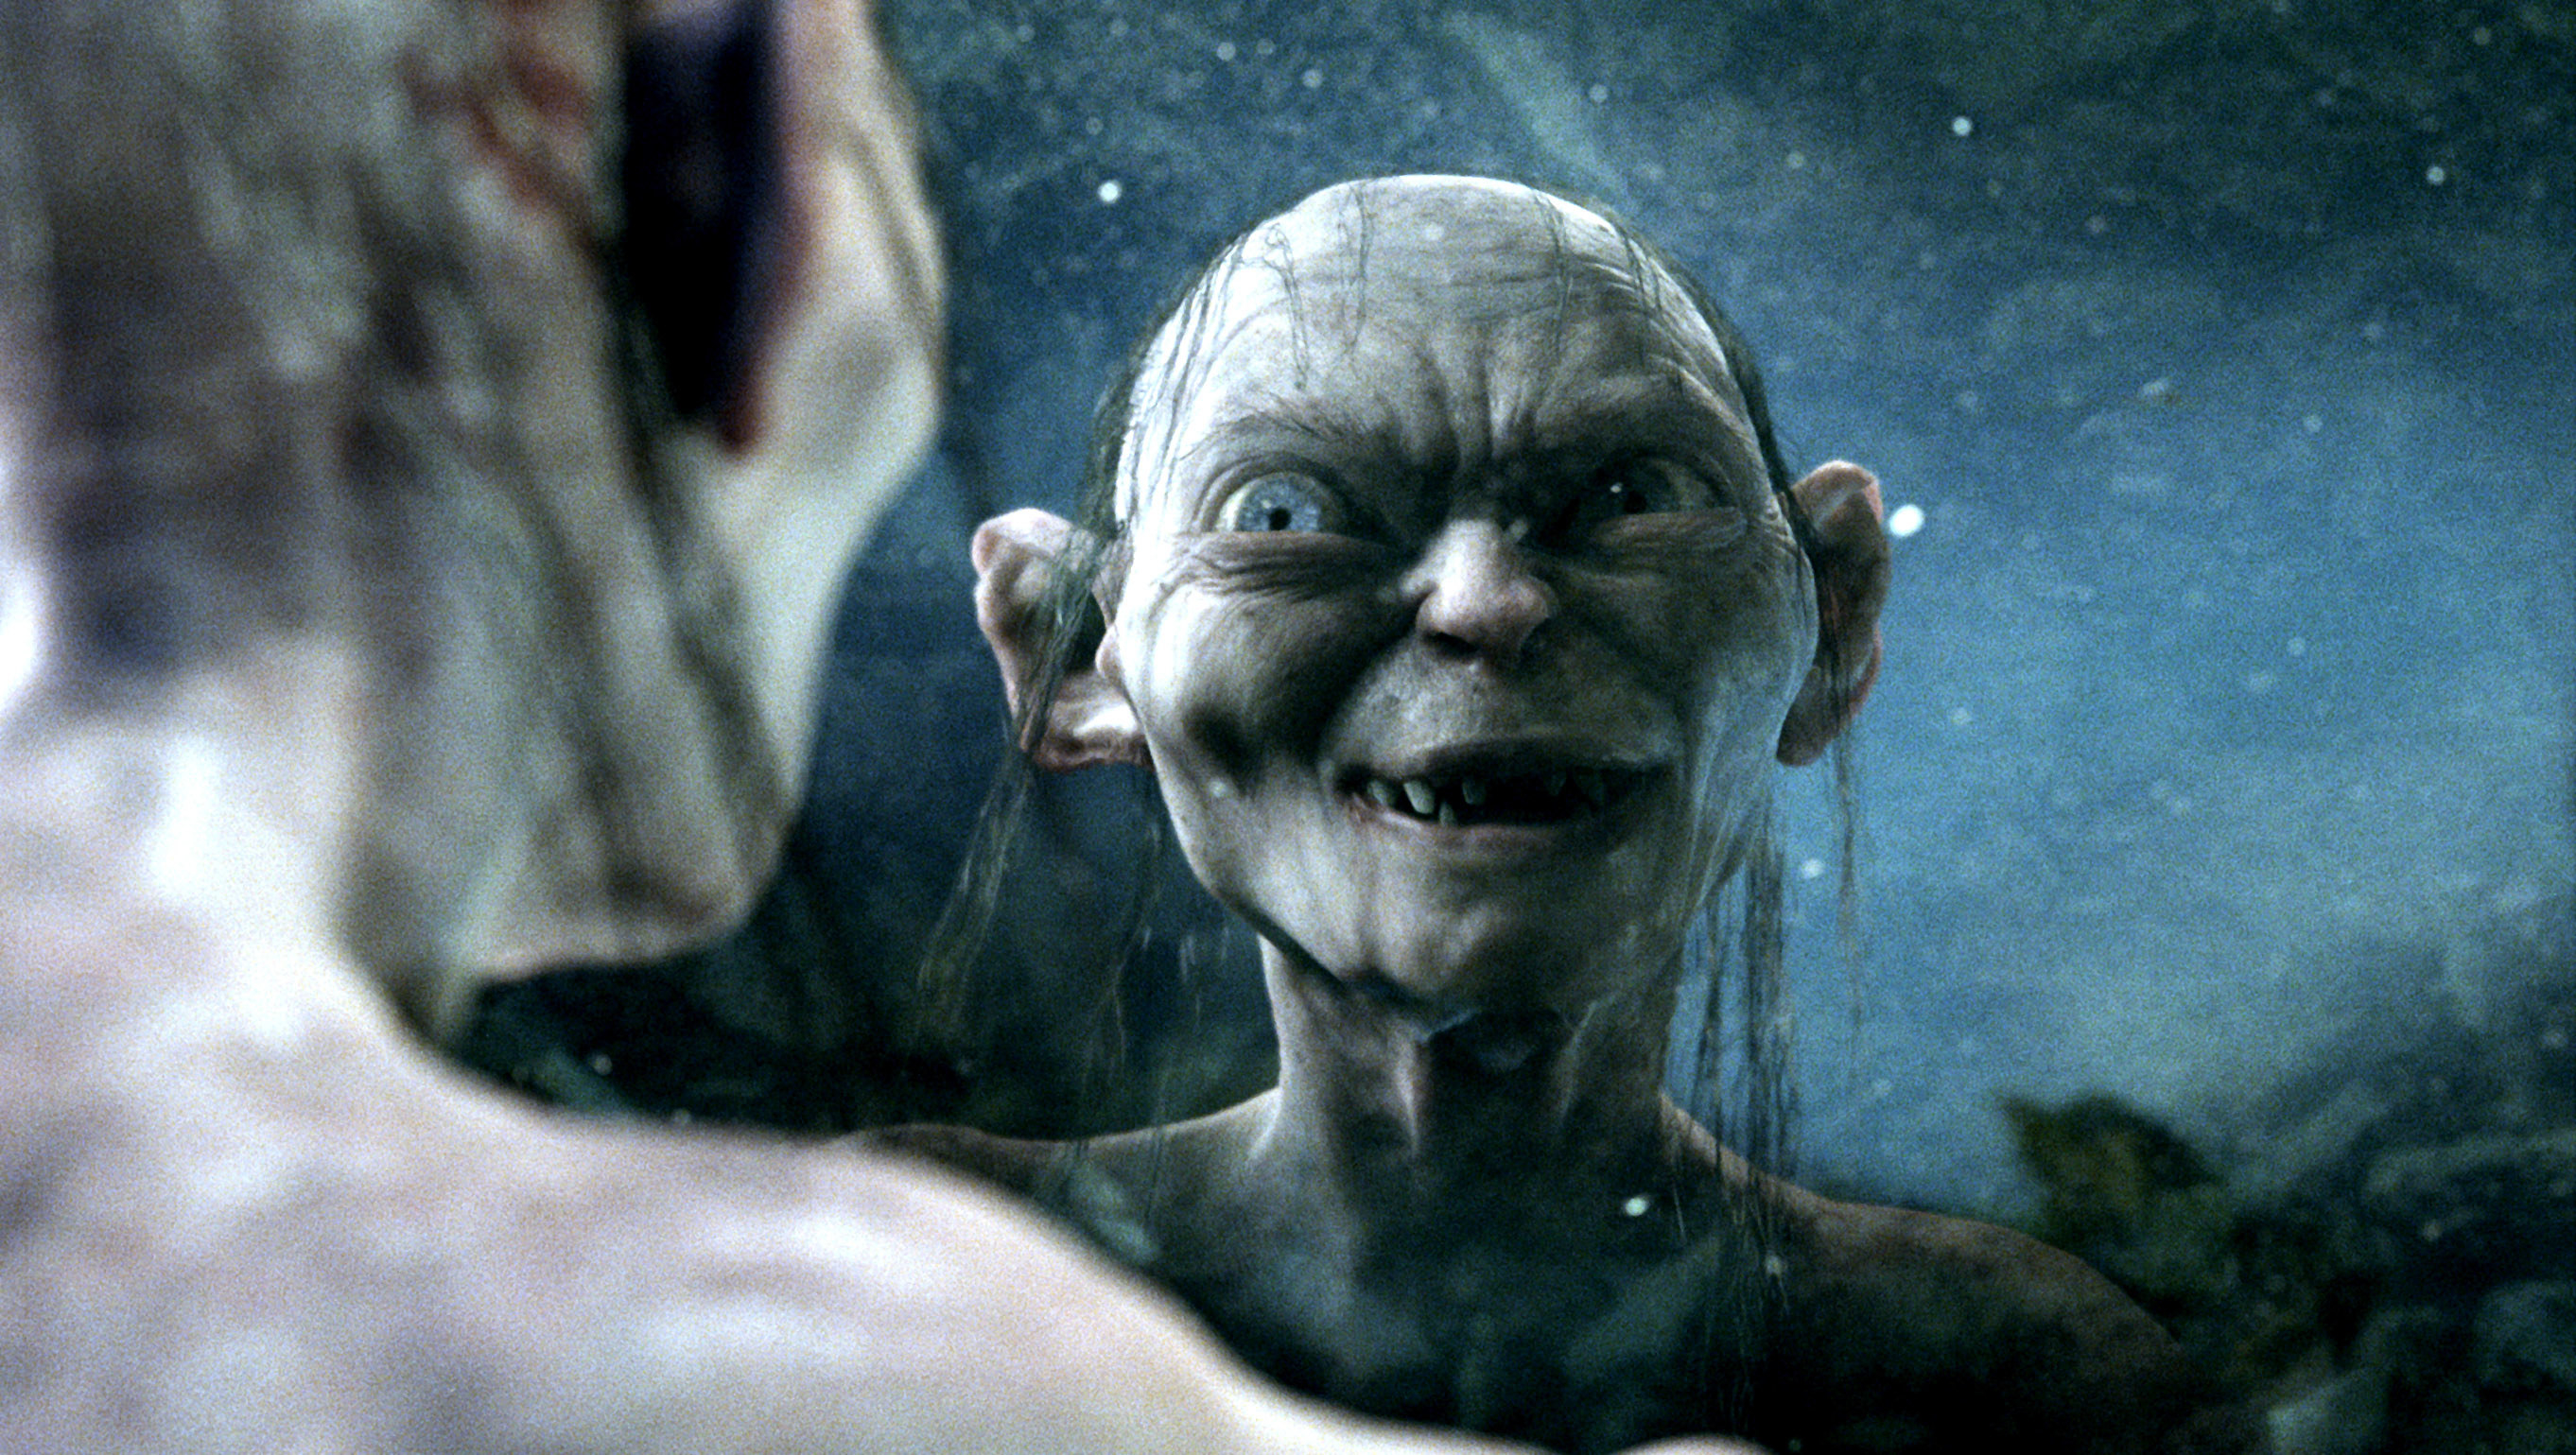 Gollum looking at his reflection in a pool of water